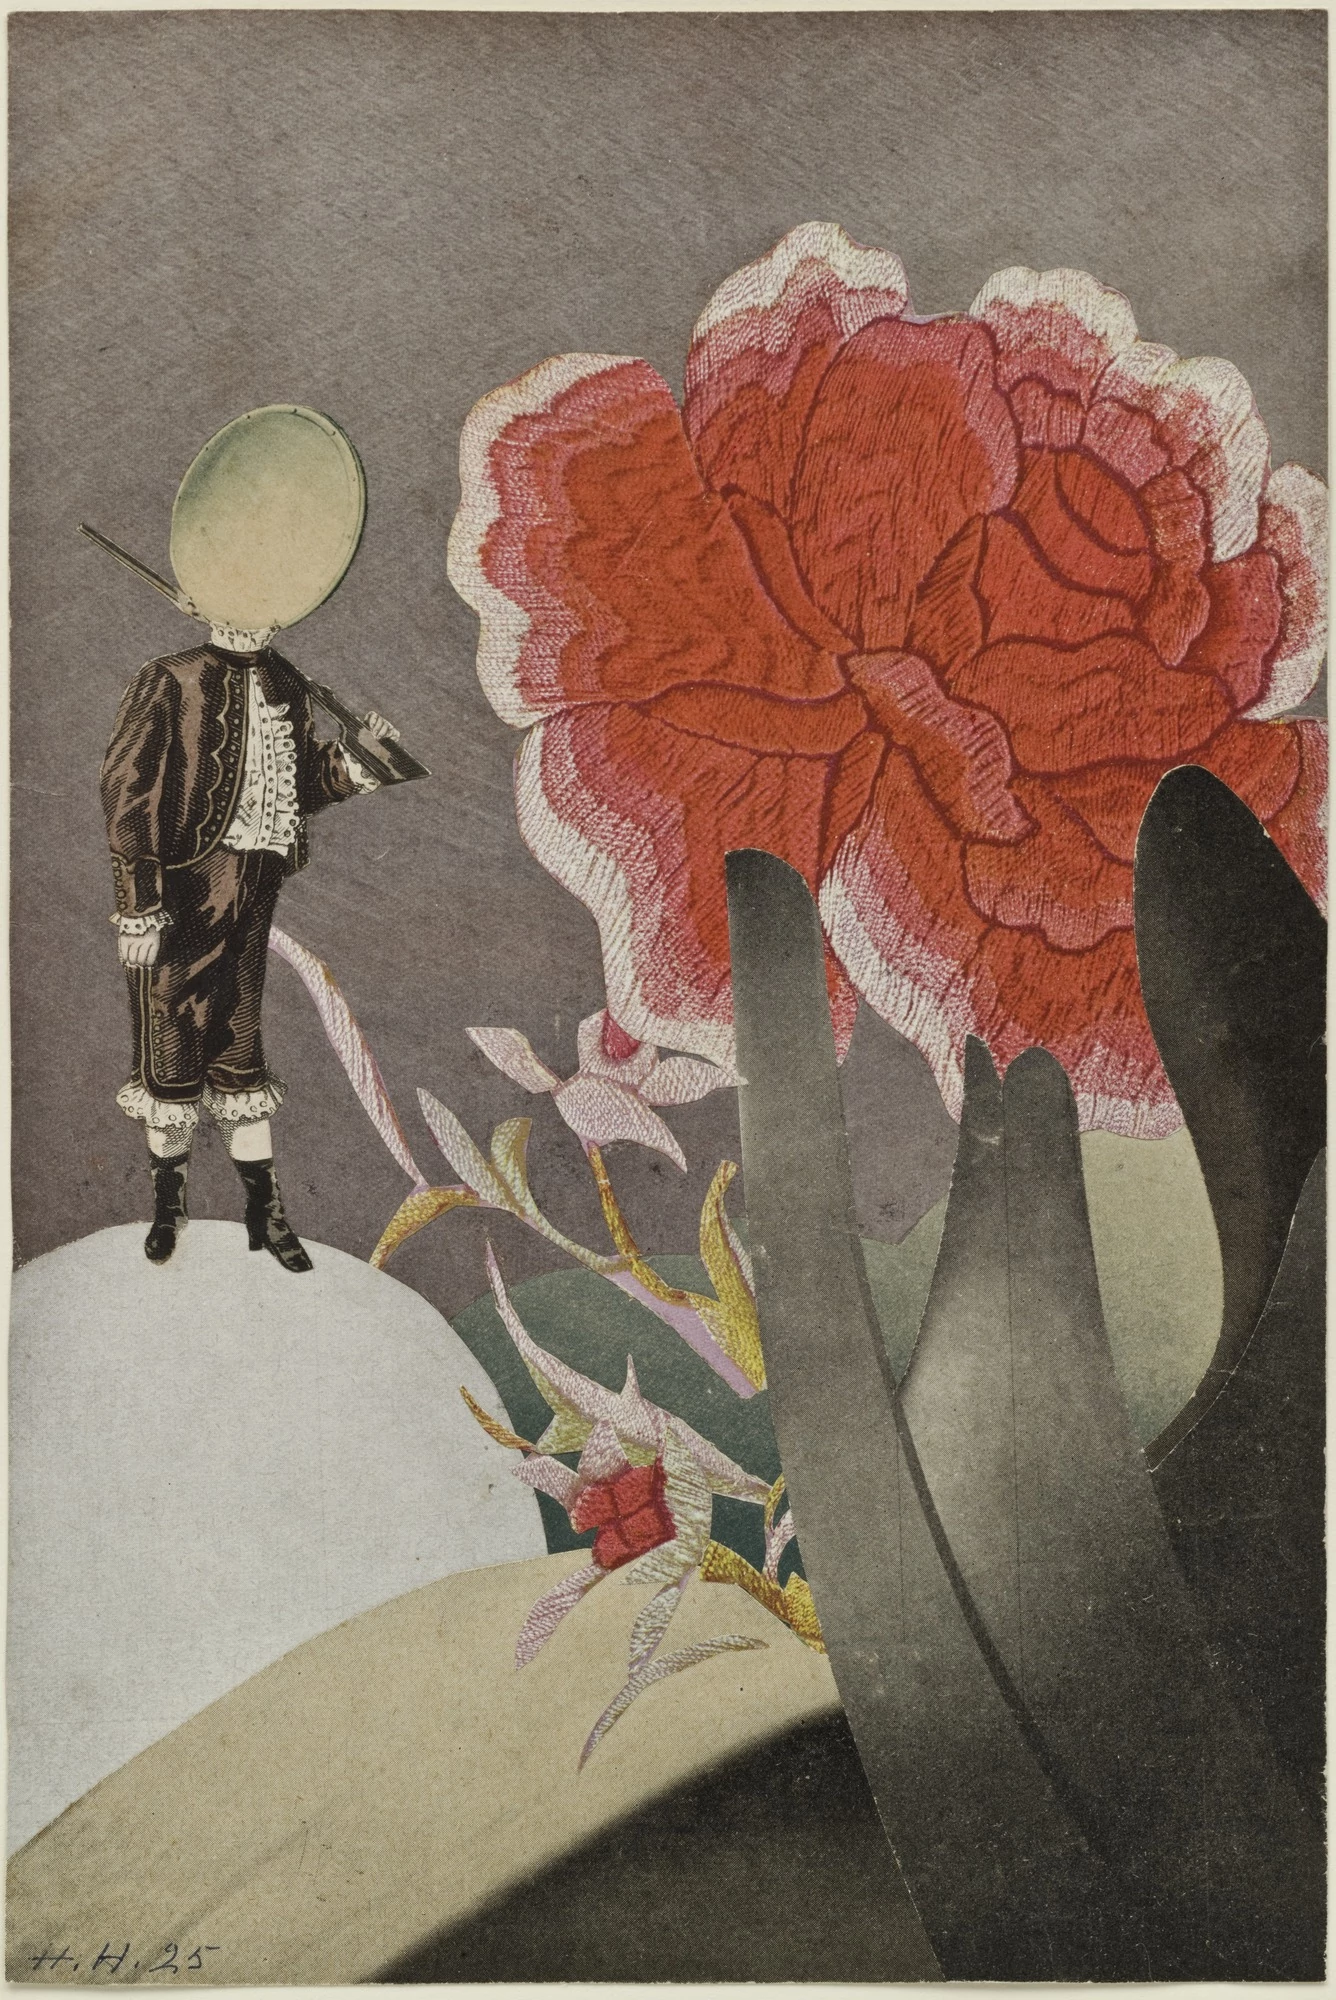 Watched, Hannah Höch